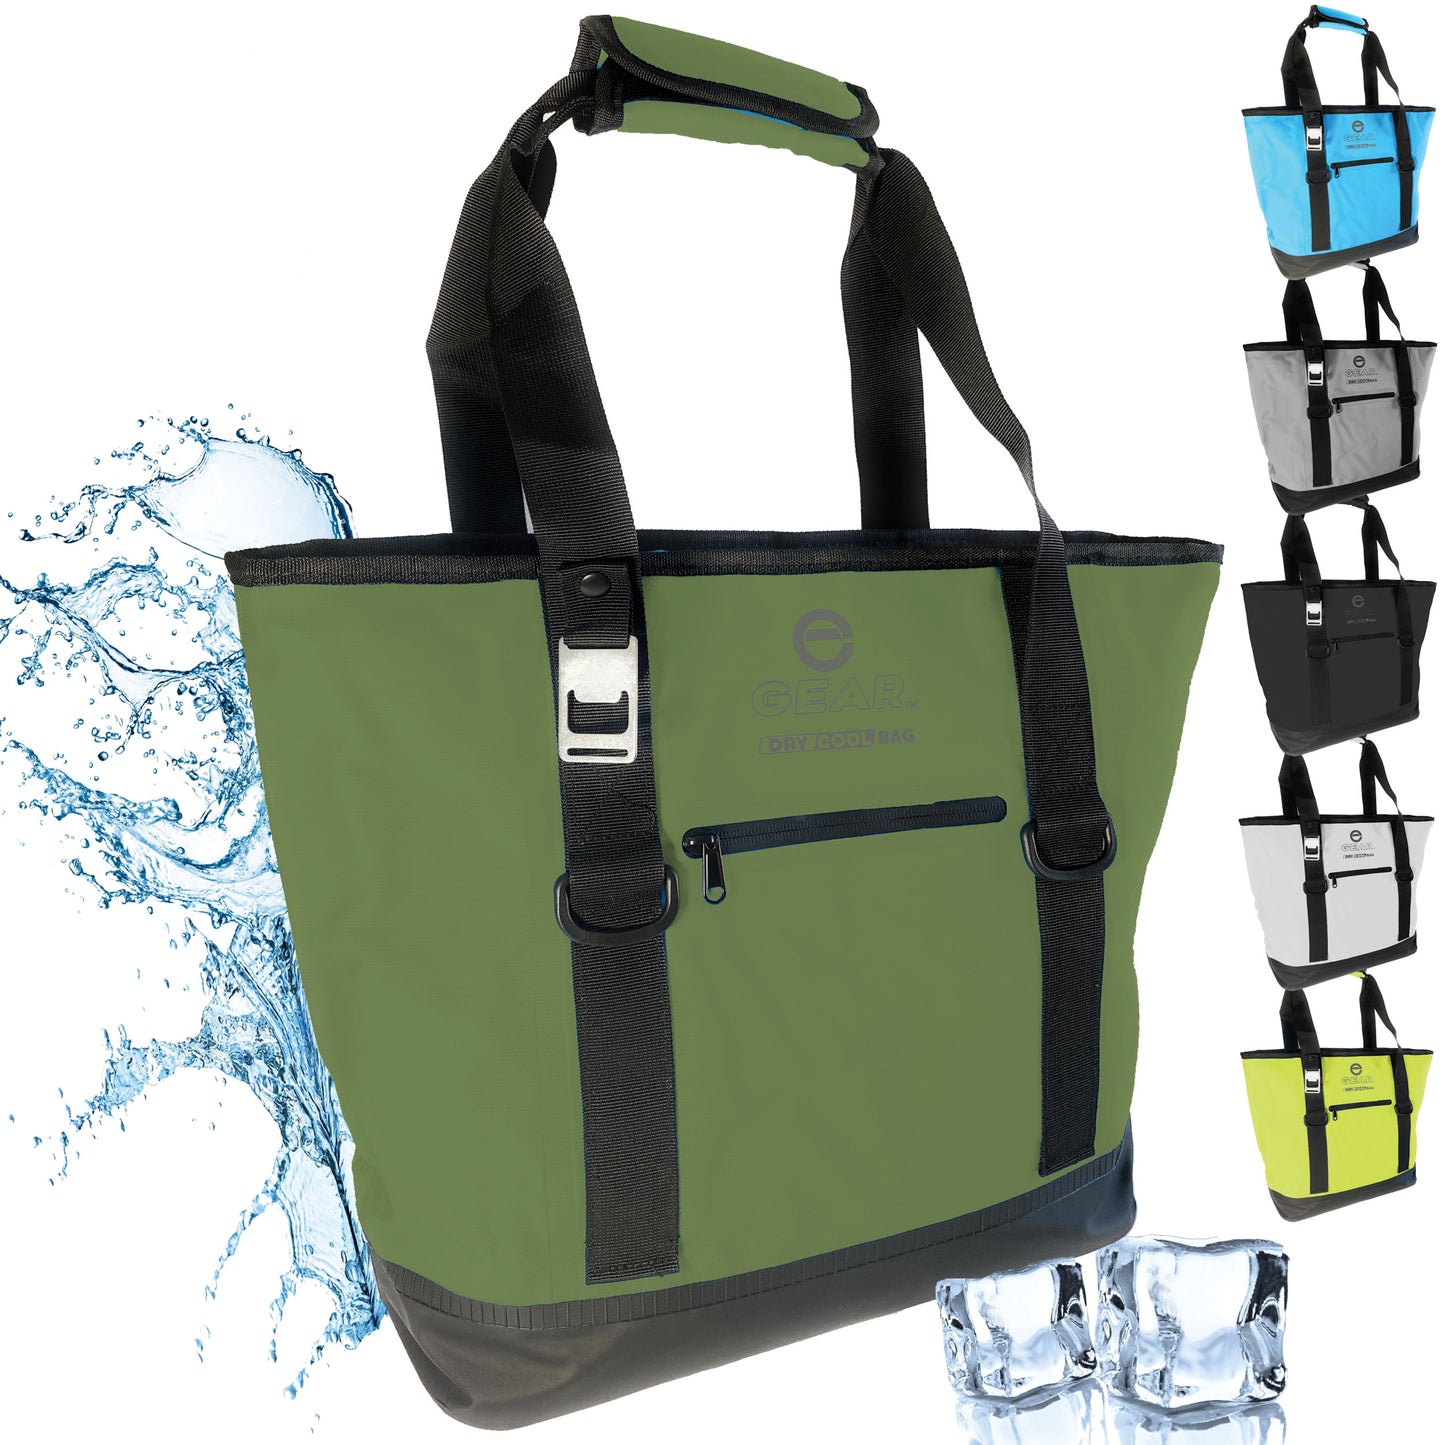 Enthusiast Gear Dry Bag Cooler Tote – Collapsible, waterproof, with Side Pocket - Perfect for Pool, Beach, Picnics, Grocery - 20 Cans